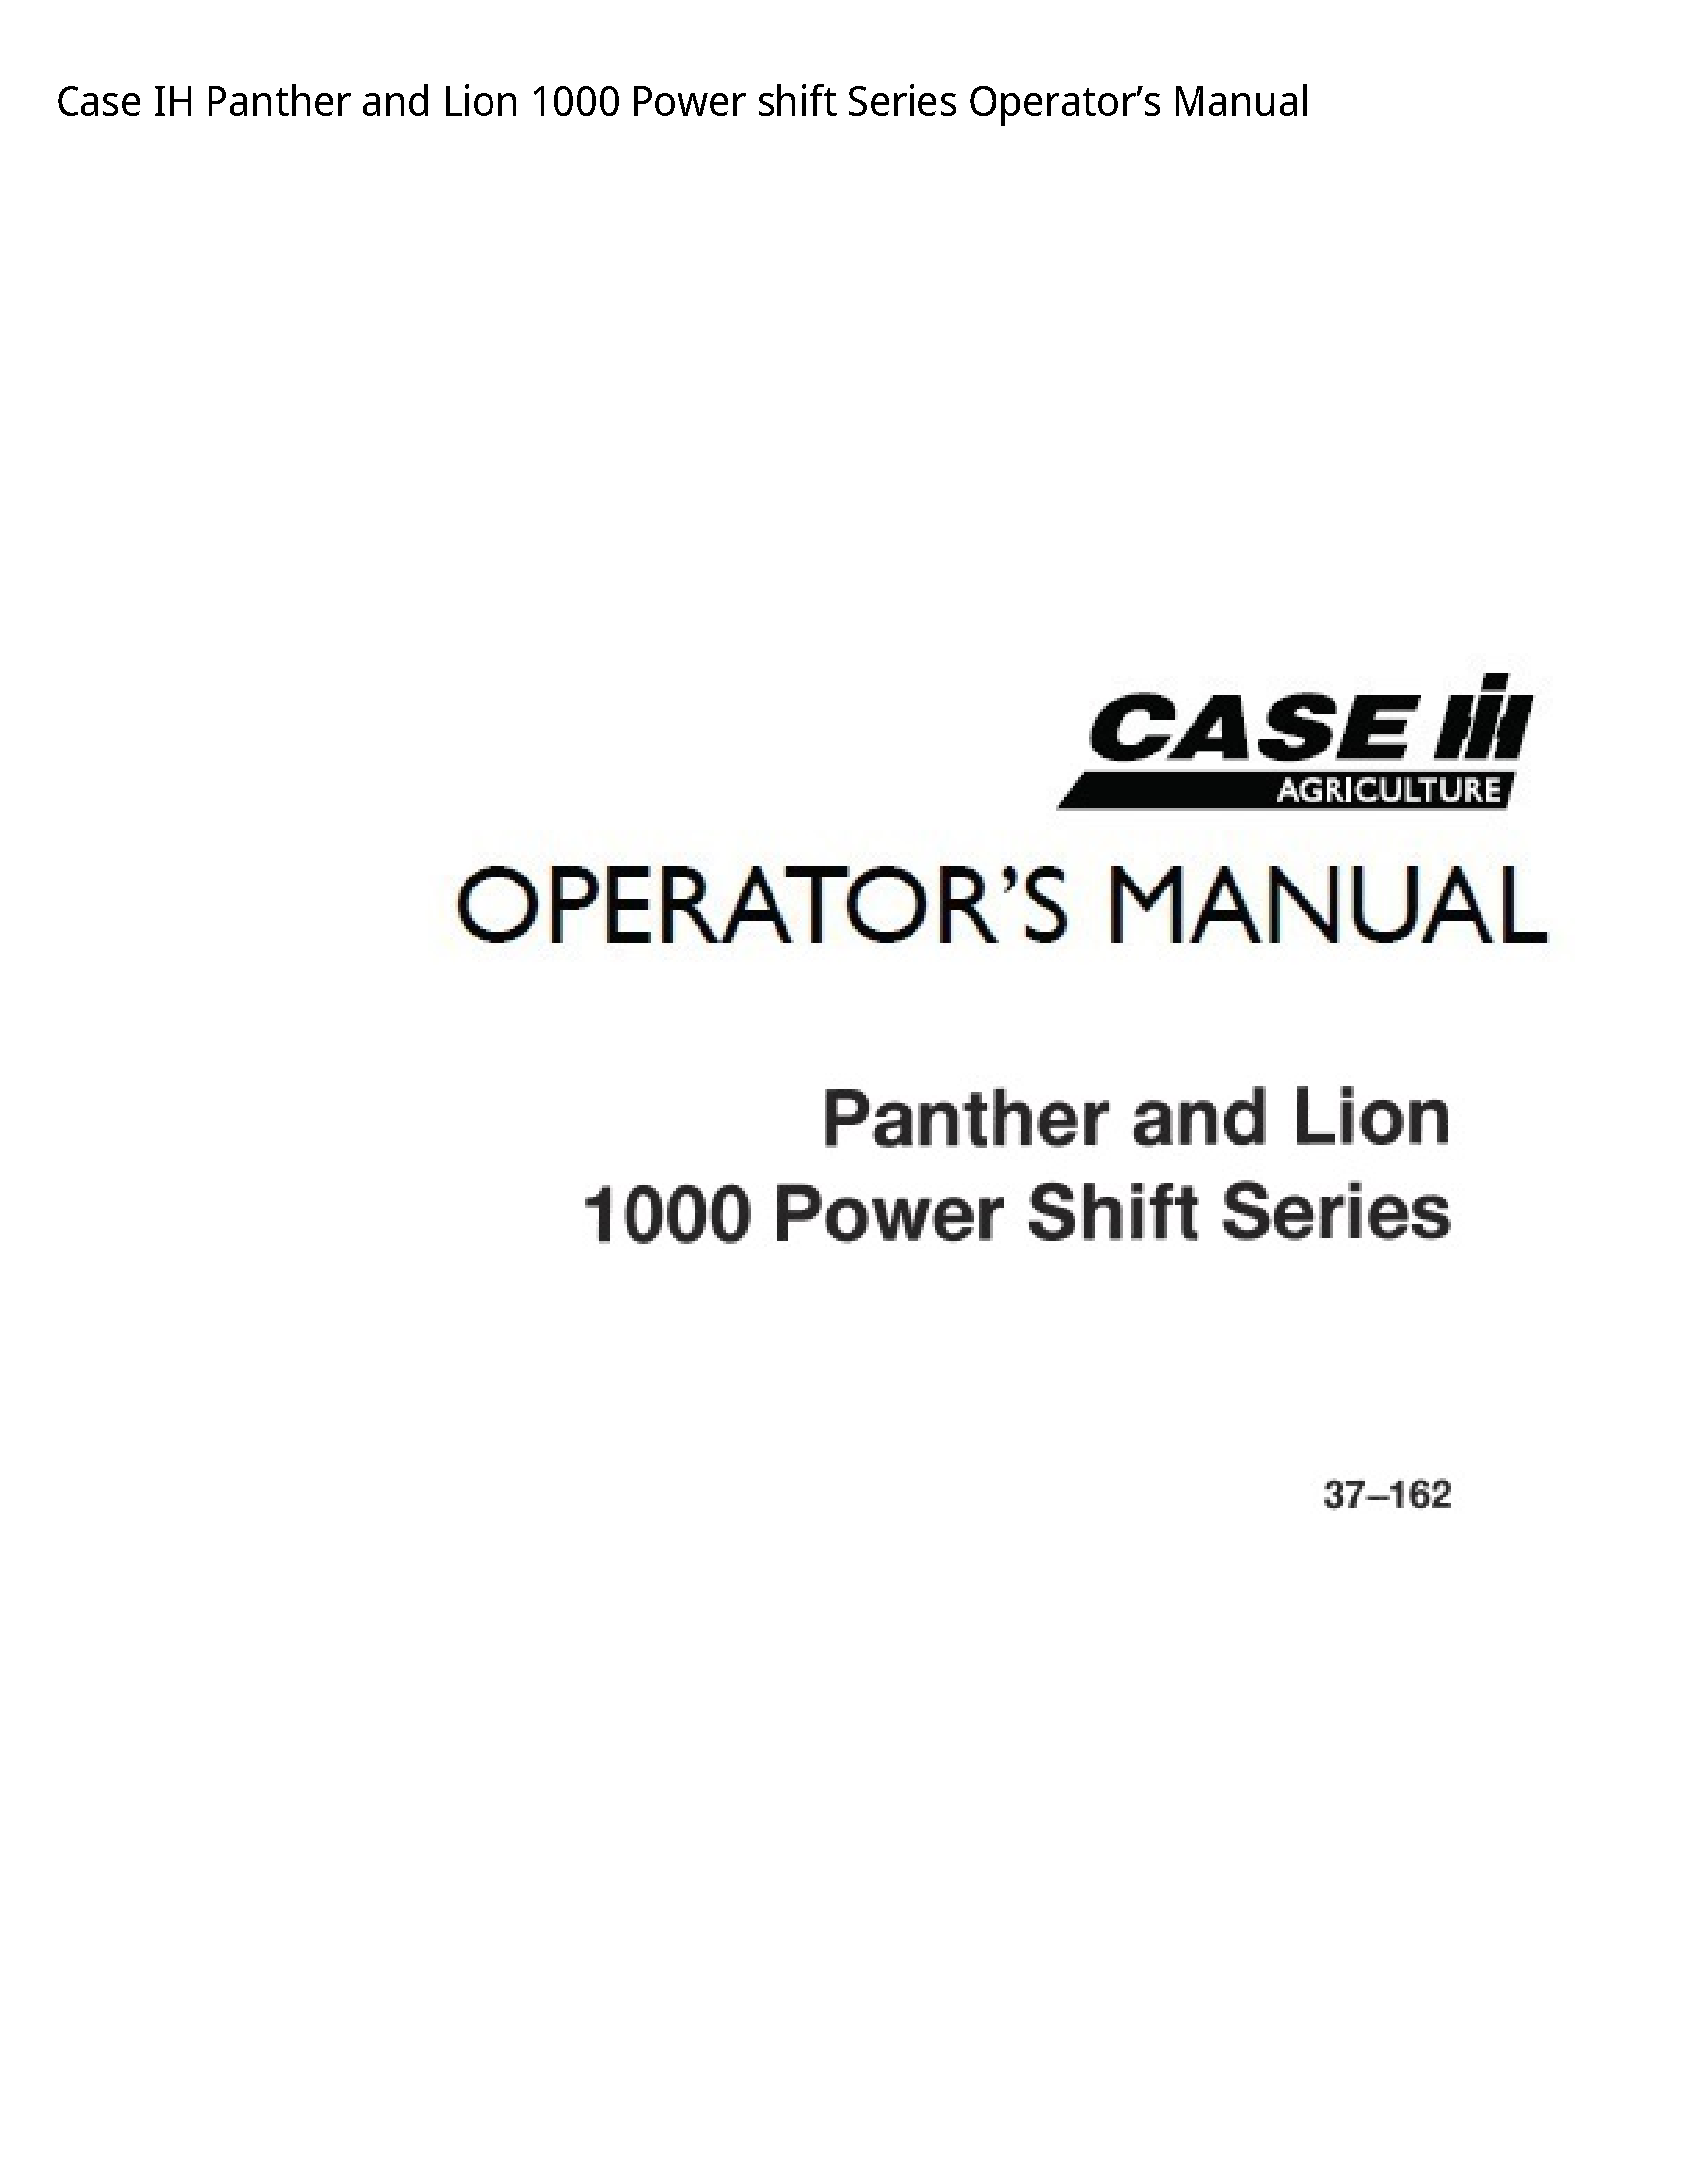 Case/Case IH 1000 IH Panther  Lion Power shift Series Operator’s manual